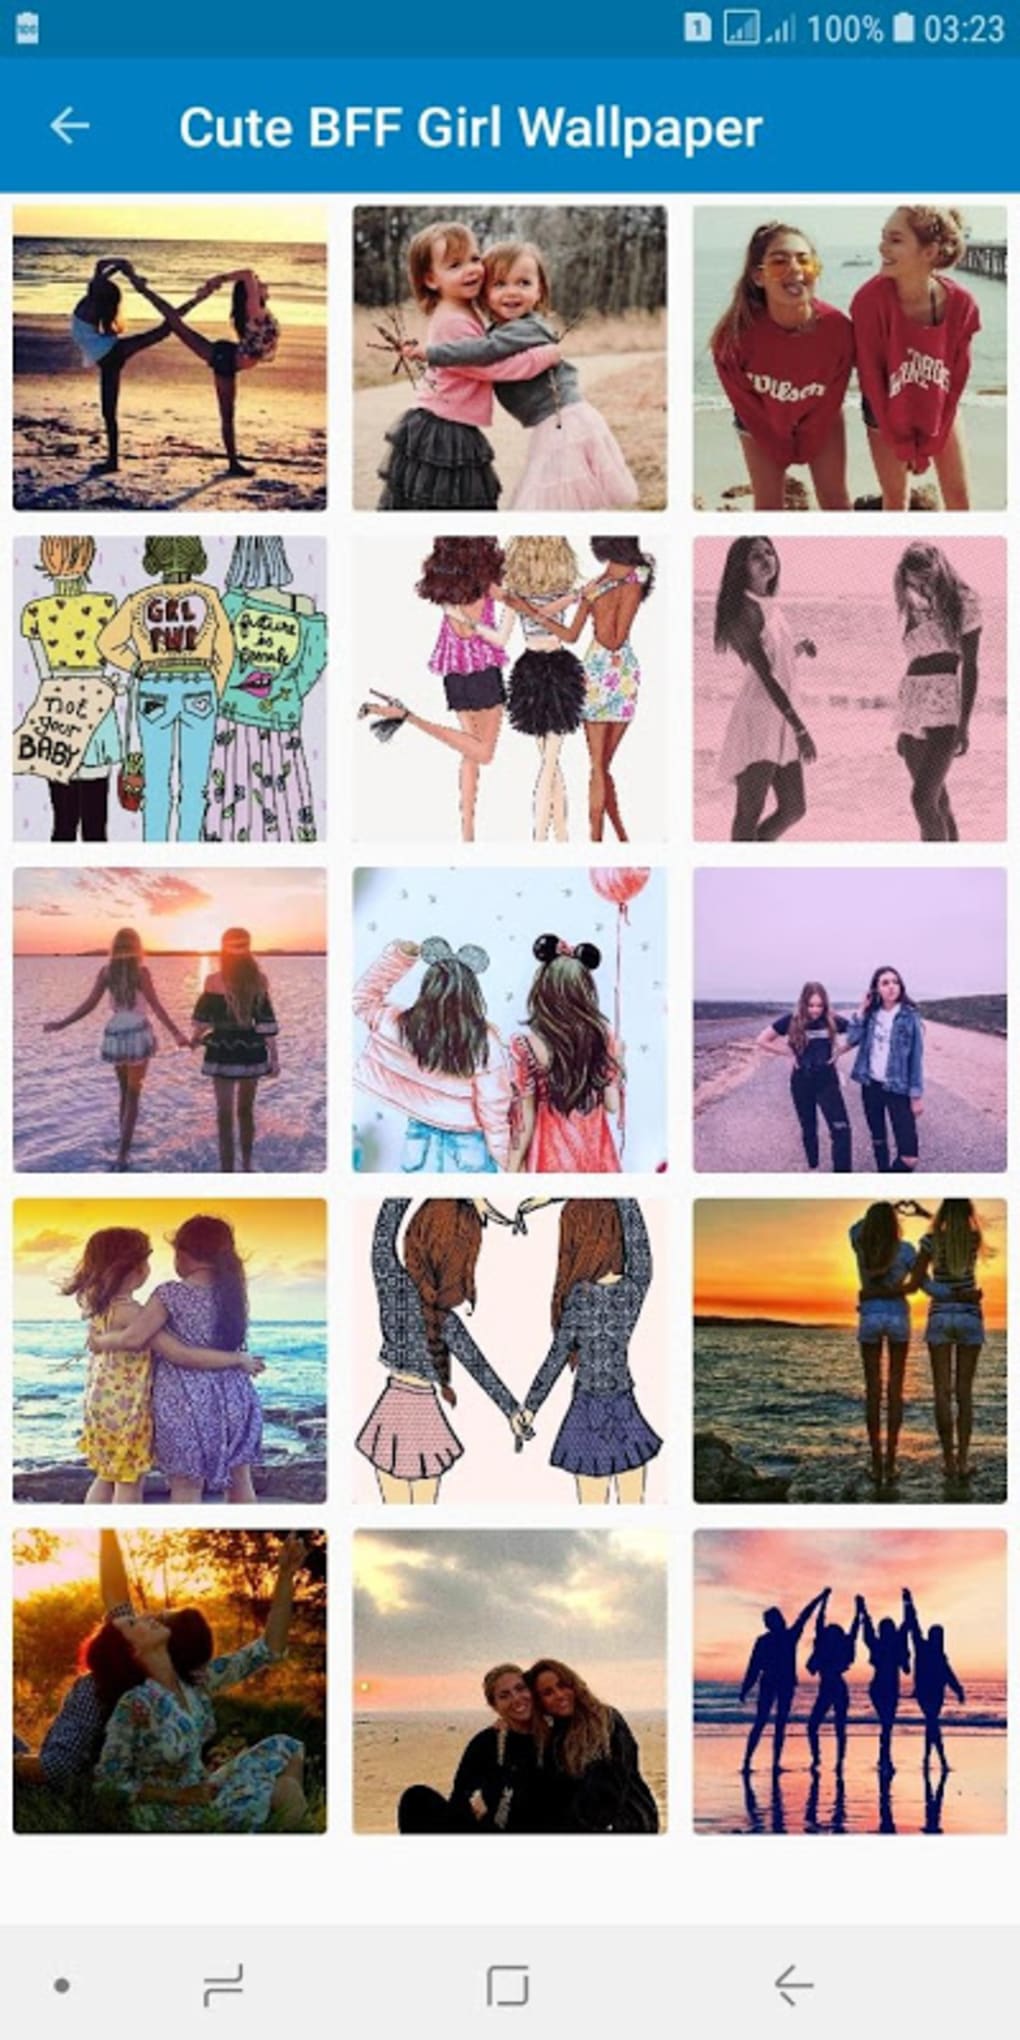  BFF Best Friend Forever Wallpaper  Cute BFF APK pour Android Télécharger